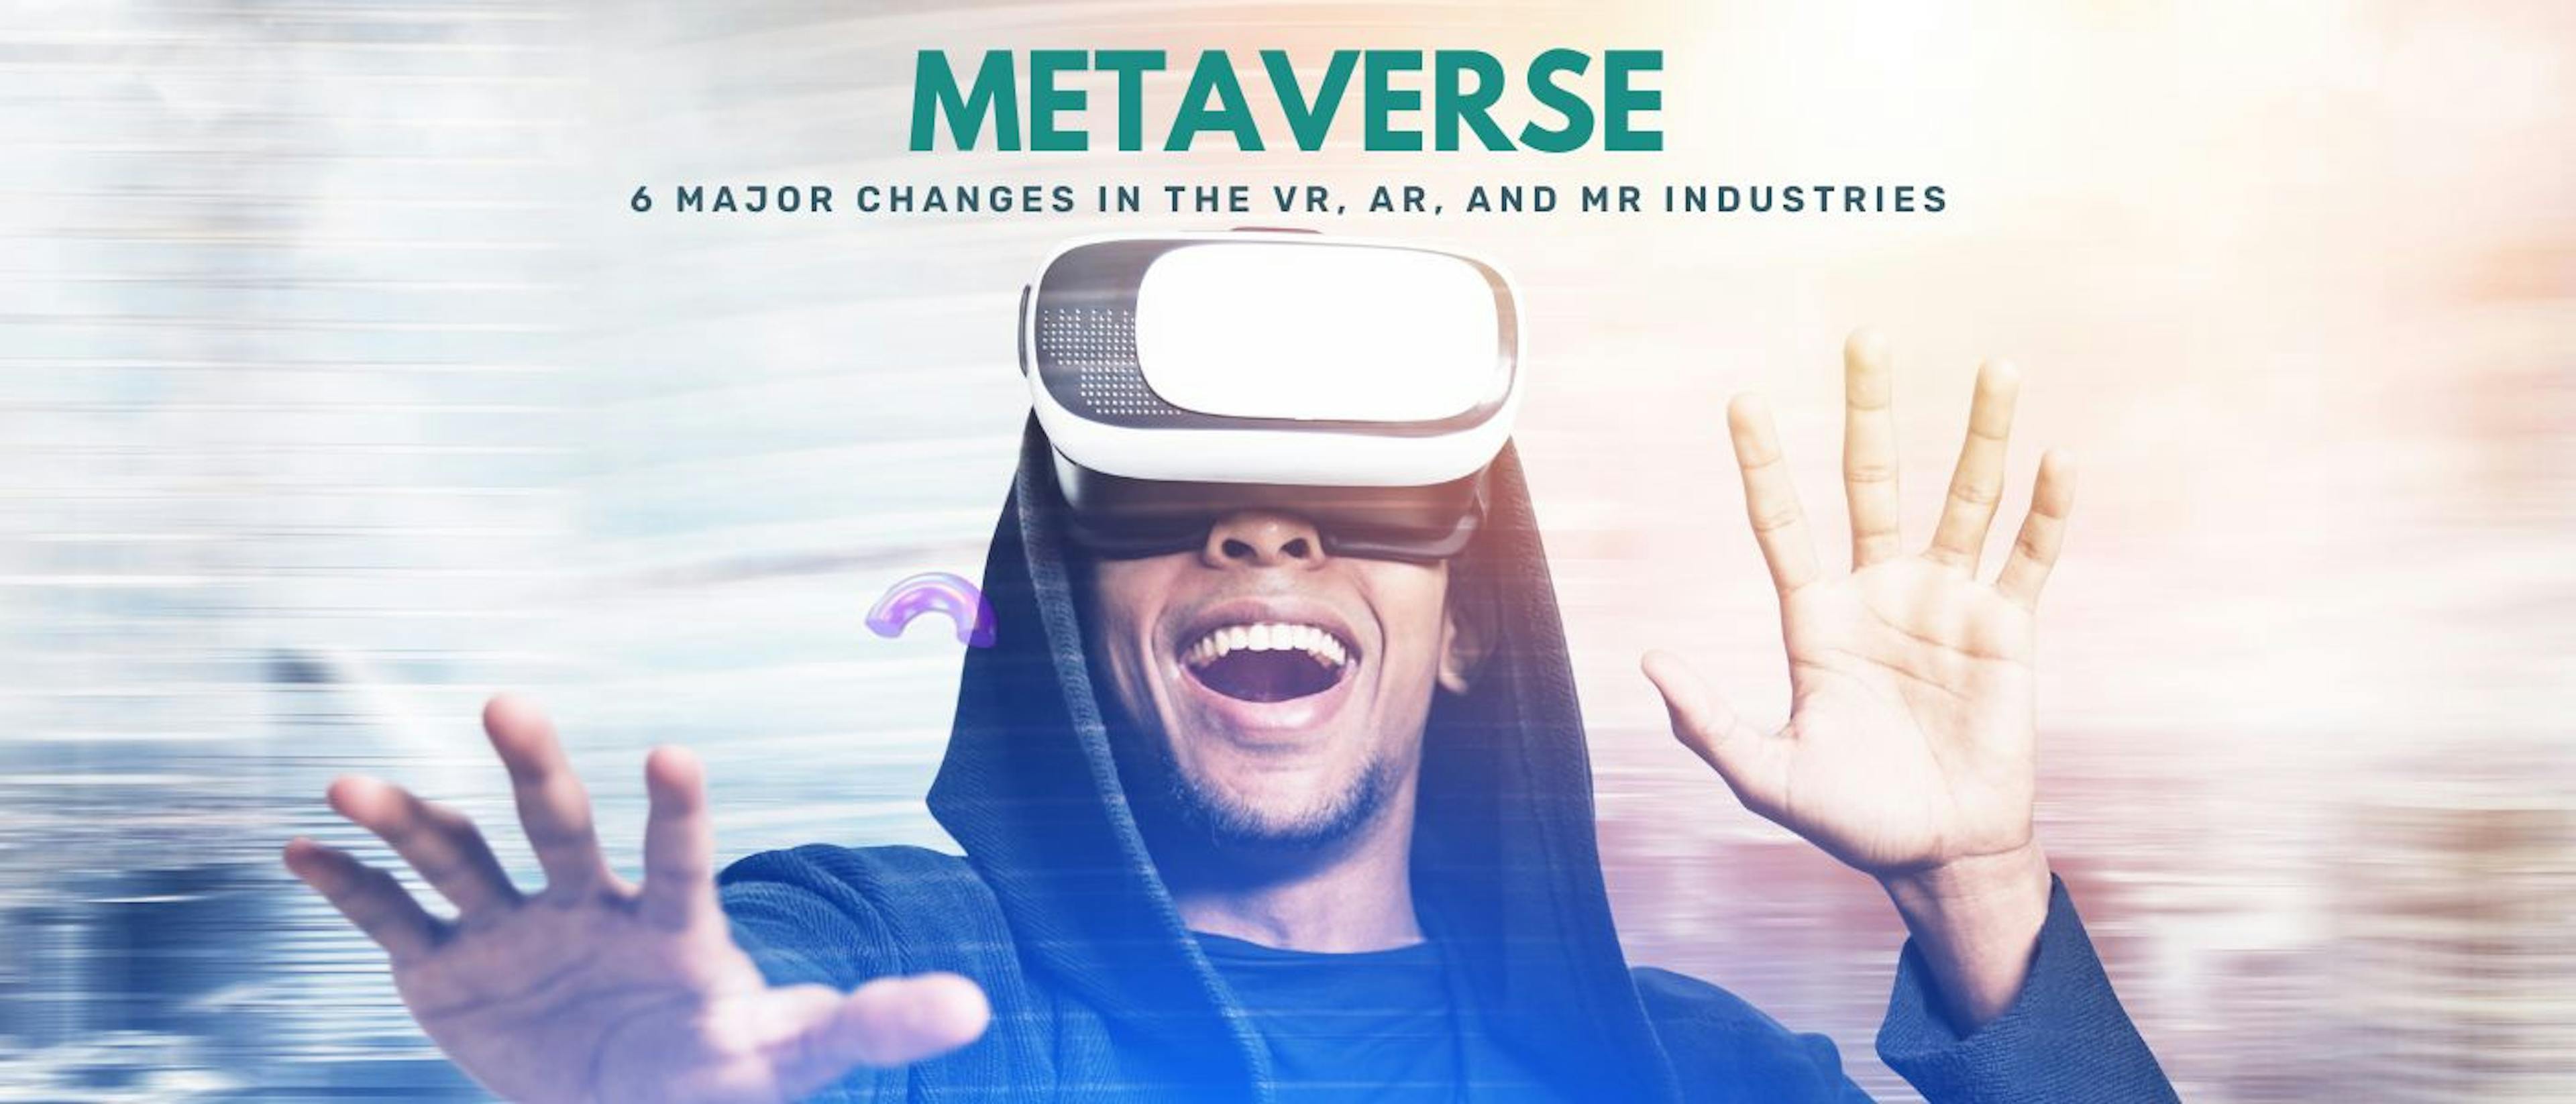 /6-major-changes-in-the-vr-ar-and-mr-industries-according-to-james-kaplan feature image